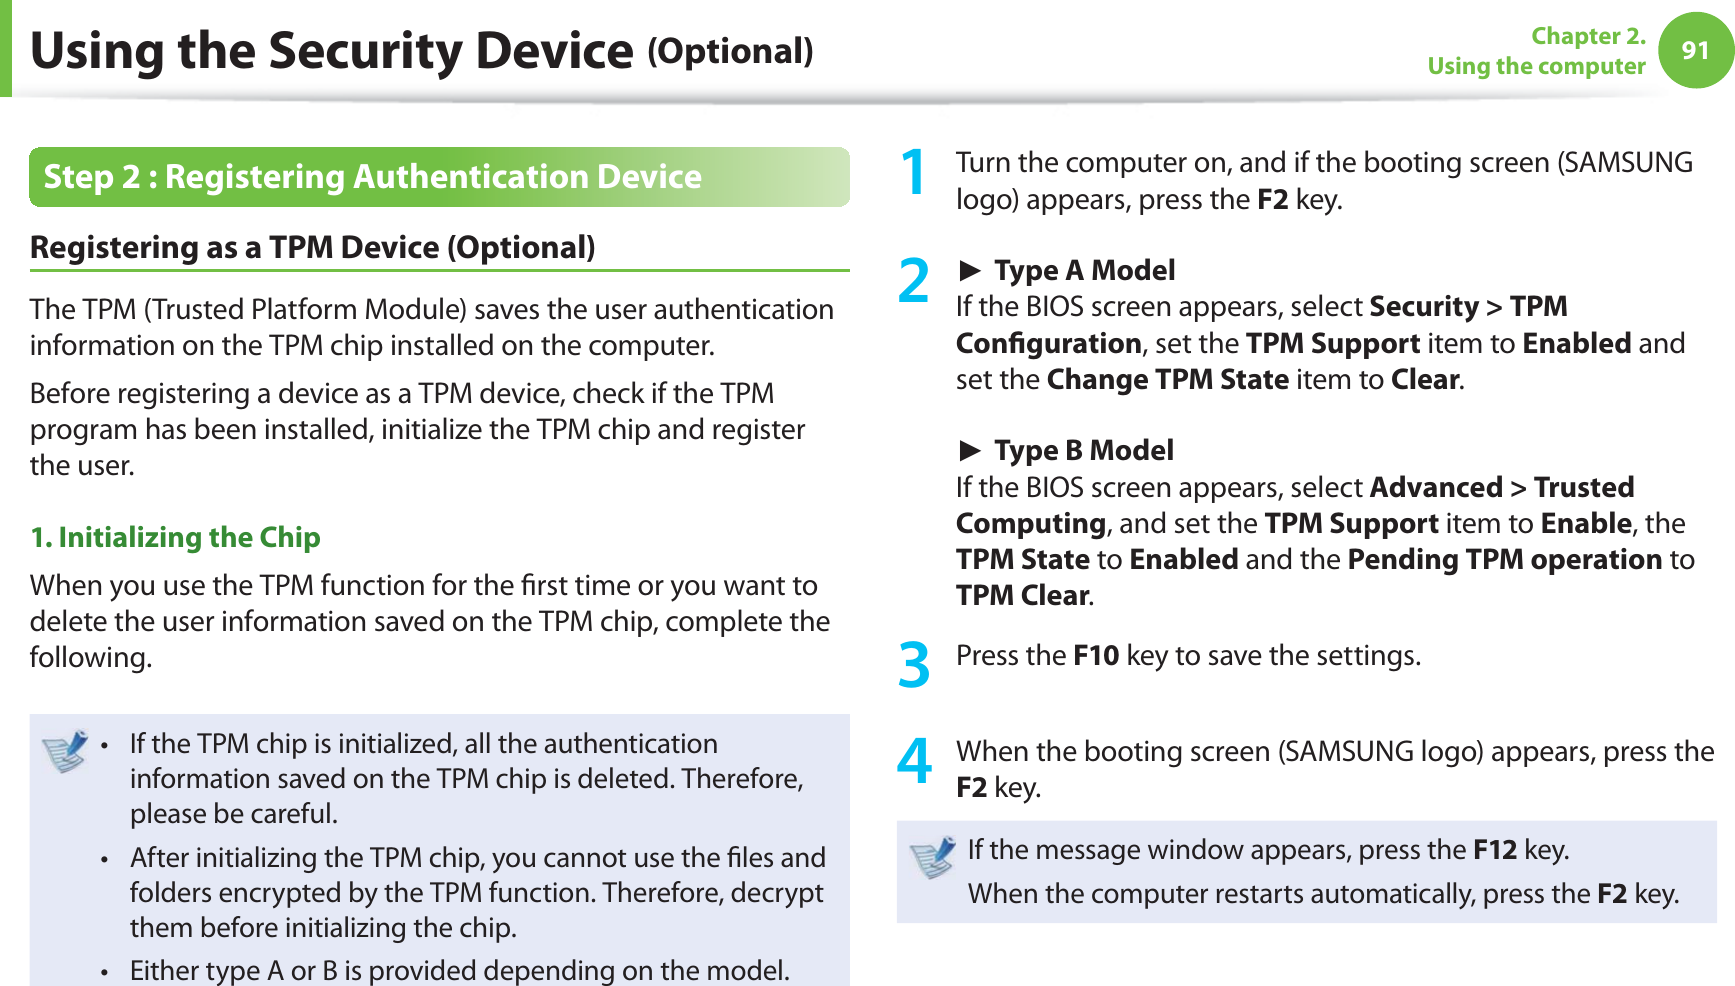 91Chapter 2. Using the computerUsing the Security Device (Optional)Step 2 : Registering Authentication Device Registering as a TPM Device (Optional)The TPM (Trusted Platform Module) saves the user authentication information on the TPM chip installed on the computer.Before registering a device as a TPM device, check if the TPM program has been installed, initialize the TPM chip and register the user.1. Initializing the Chip When you use the TPM function for the ﬁ rst time or you want to delete the user information saved on the TPM chip, complete the following.If the TPM chip is initialized, all the authentication t information saved on the TPM chip is deleted. Therefore, please be careful.After initializing the TPM chip, you cannot use the ﬁ les and t folders encrypted by the TPM function. Therefore, decrypt them before initializing the chip.Either type A or B is provided depending on the model. t 1  Turn the computer on, and if the booting screen (SAMSUNG logo) appears, press the F2 key. ► Type A ModelIf the BIOS screen appears, select Security &gt; TPM Conﬁ guration, set the TPM Support item to Enabled and set the Change TPM State item to Clear. ► Type B ModelIf the BIOS screen appears, select Advanced &gt; Trusted Computing, and set the TPM Support item to Enable, the TPM State to Enabled and the Pending TPM operation to TPM Clear.3 Press the F10 key to save the settings.4  When the booting screen (SAMSUNG logo) appears, press the F2 key.If the message window appears, press the F12 key. When the computer restarts automatically, press the F2 key.